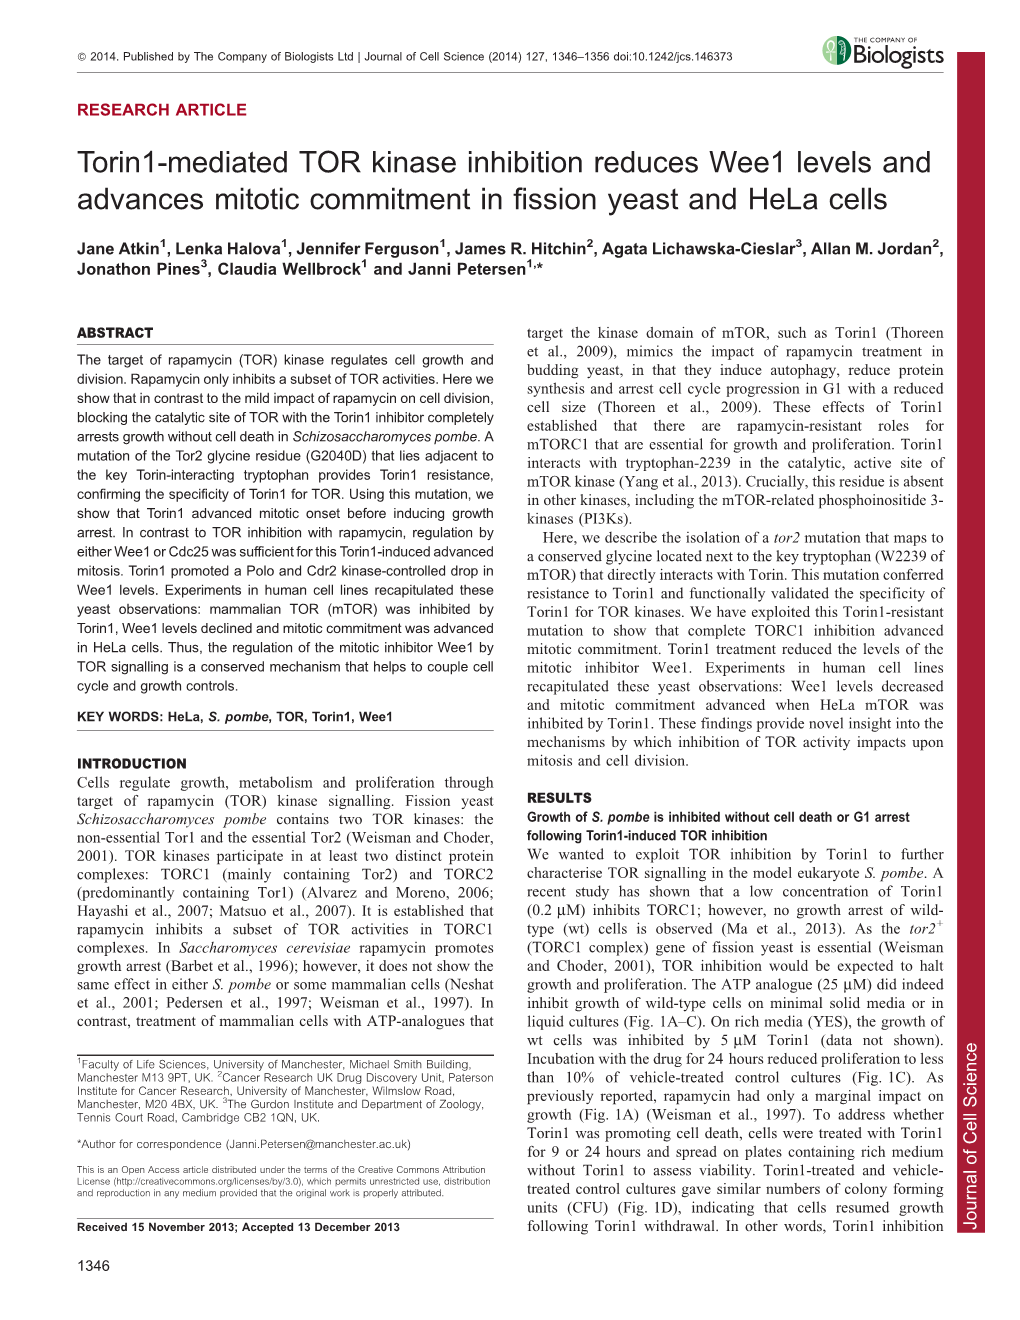 Torin1-Mediated TOR Kinase Inhibition Reduces Wee1 Levels And